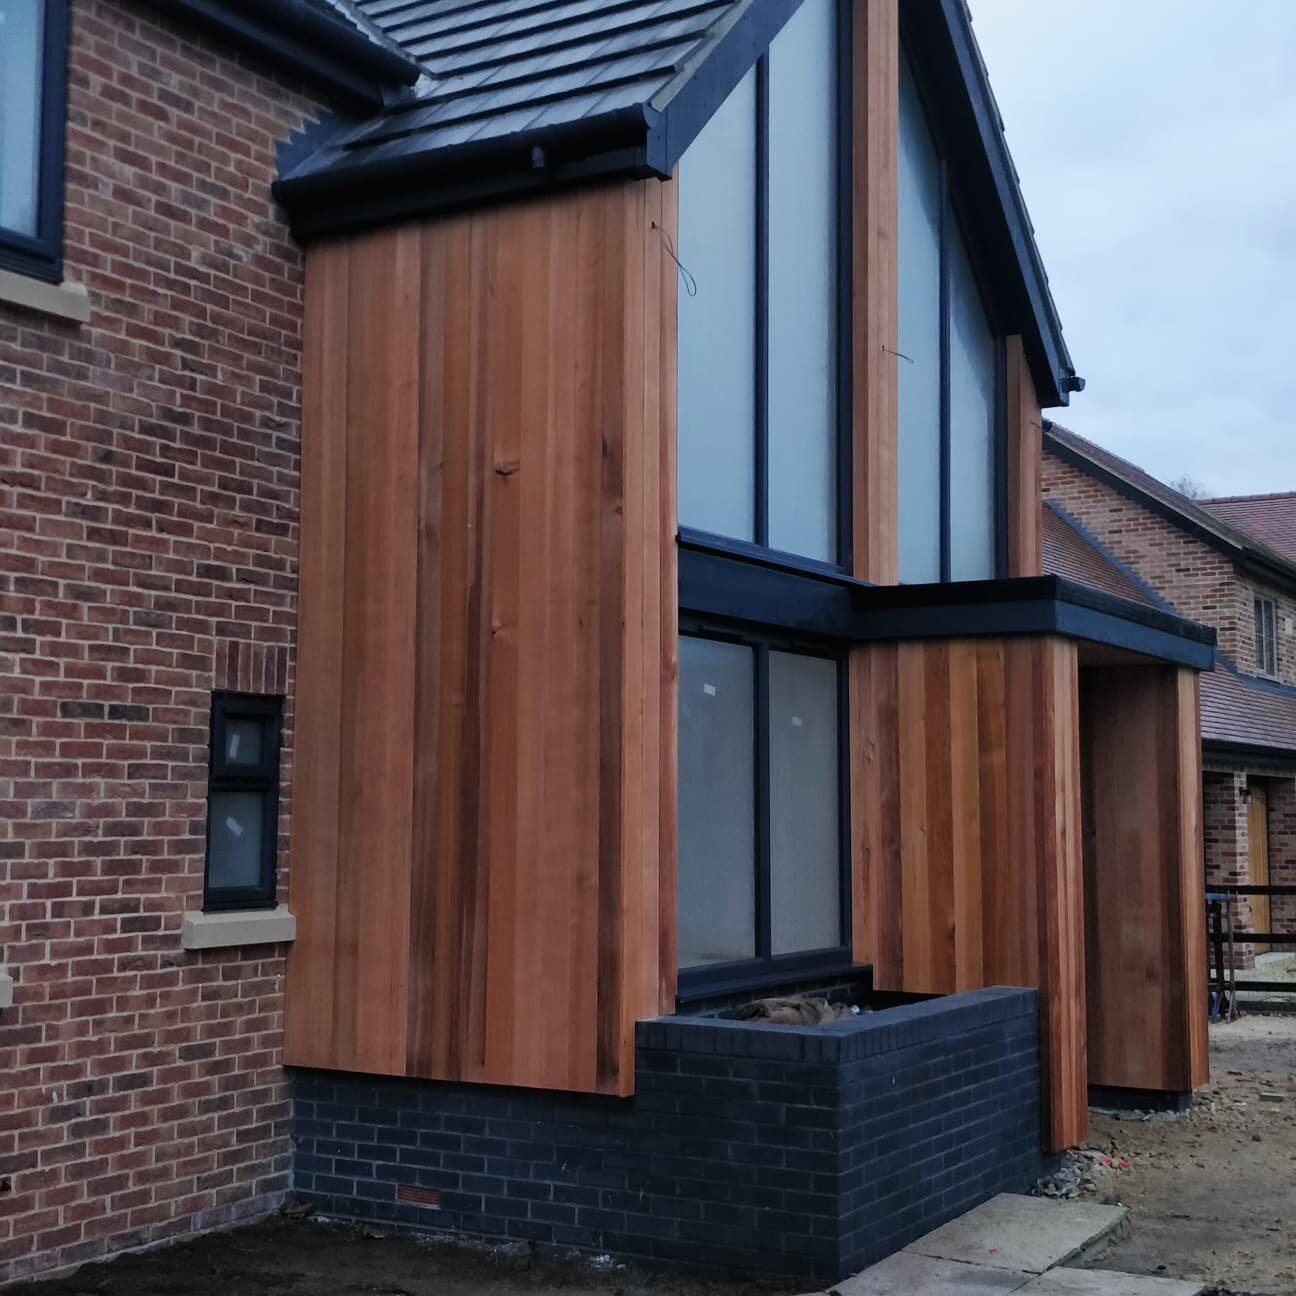 Red cedar finishing to front aspect of Greenfields, our latest 5 bedroom new home development in Wilburton Cambridgeshire. Popped out to meet the trades early this morning and took these stunning shots. Looking forward to listing for sale soon. Visit